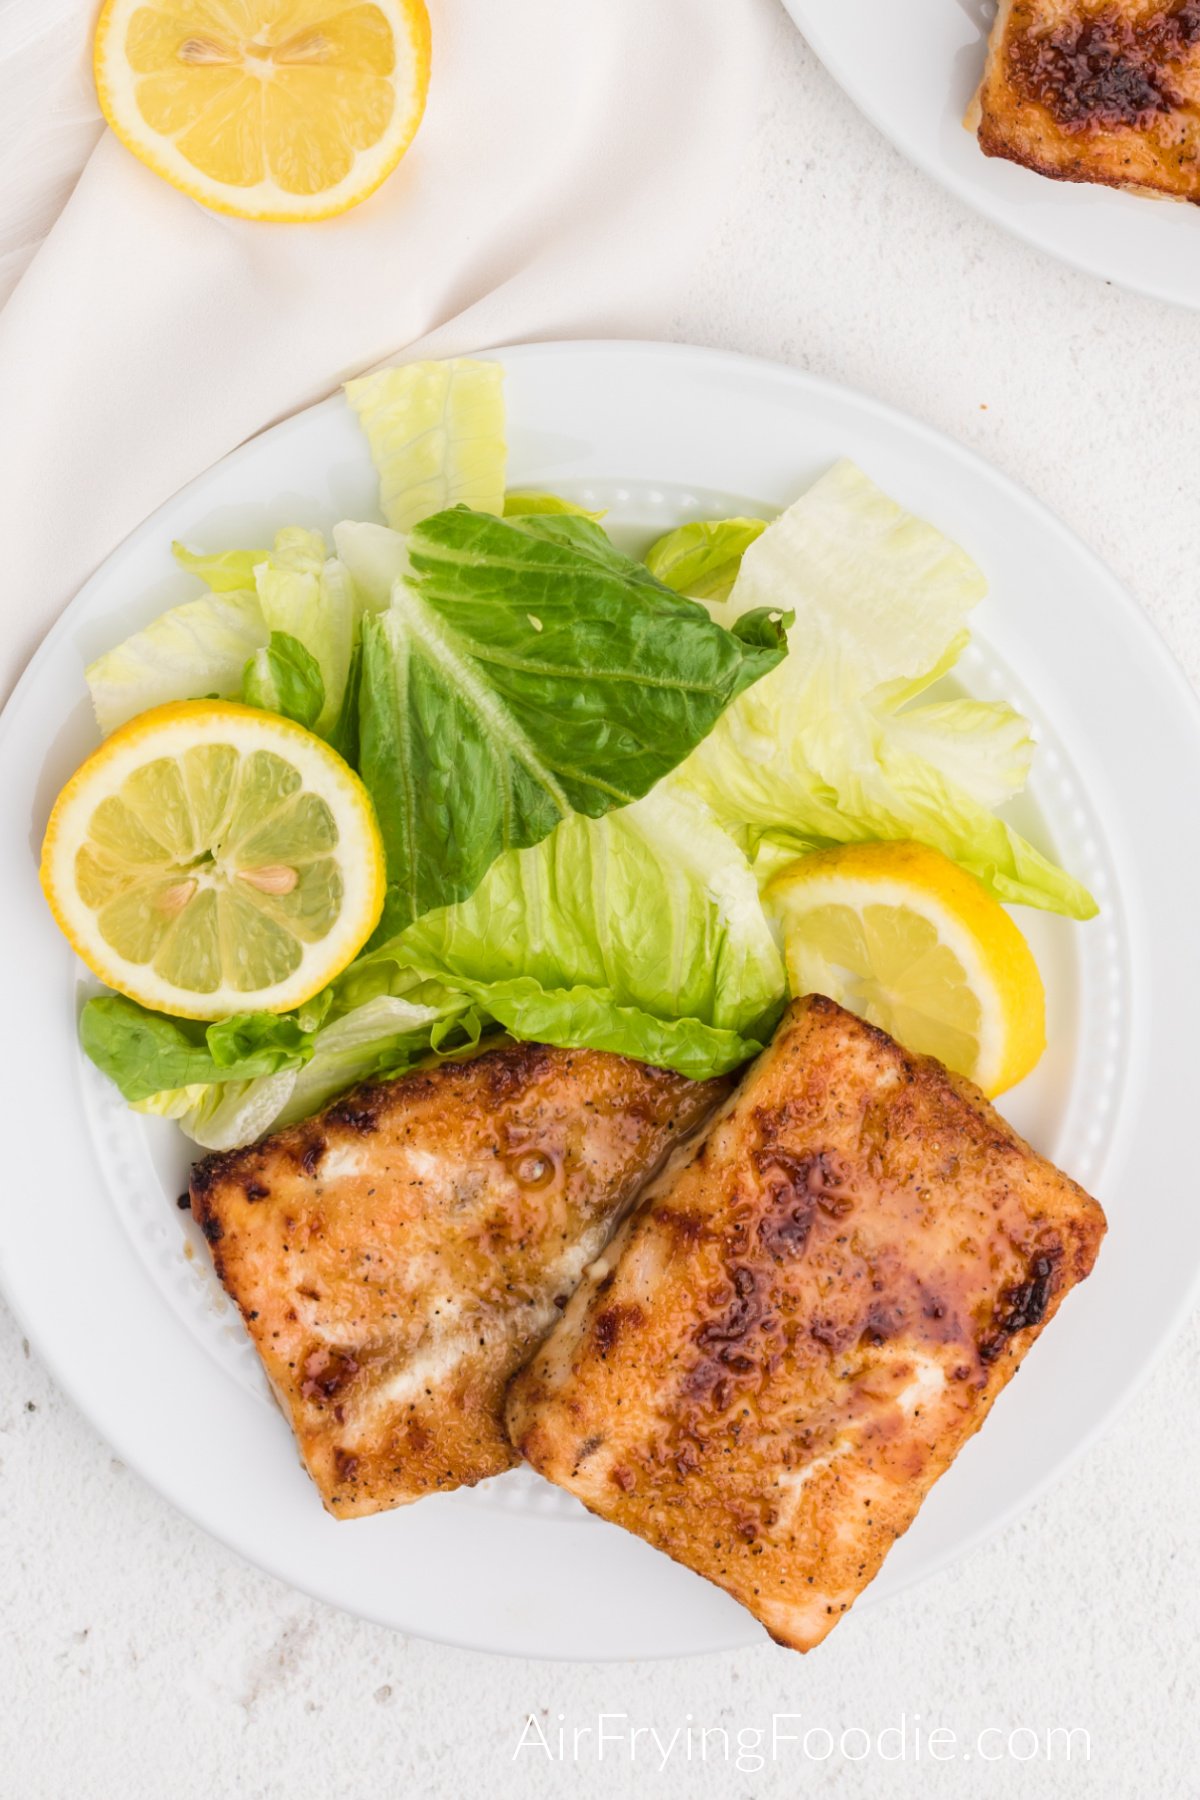 Fully cooked Air fryer frozen salmon on a plate with salad and lemon slices. Ready to eat.